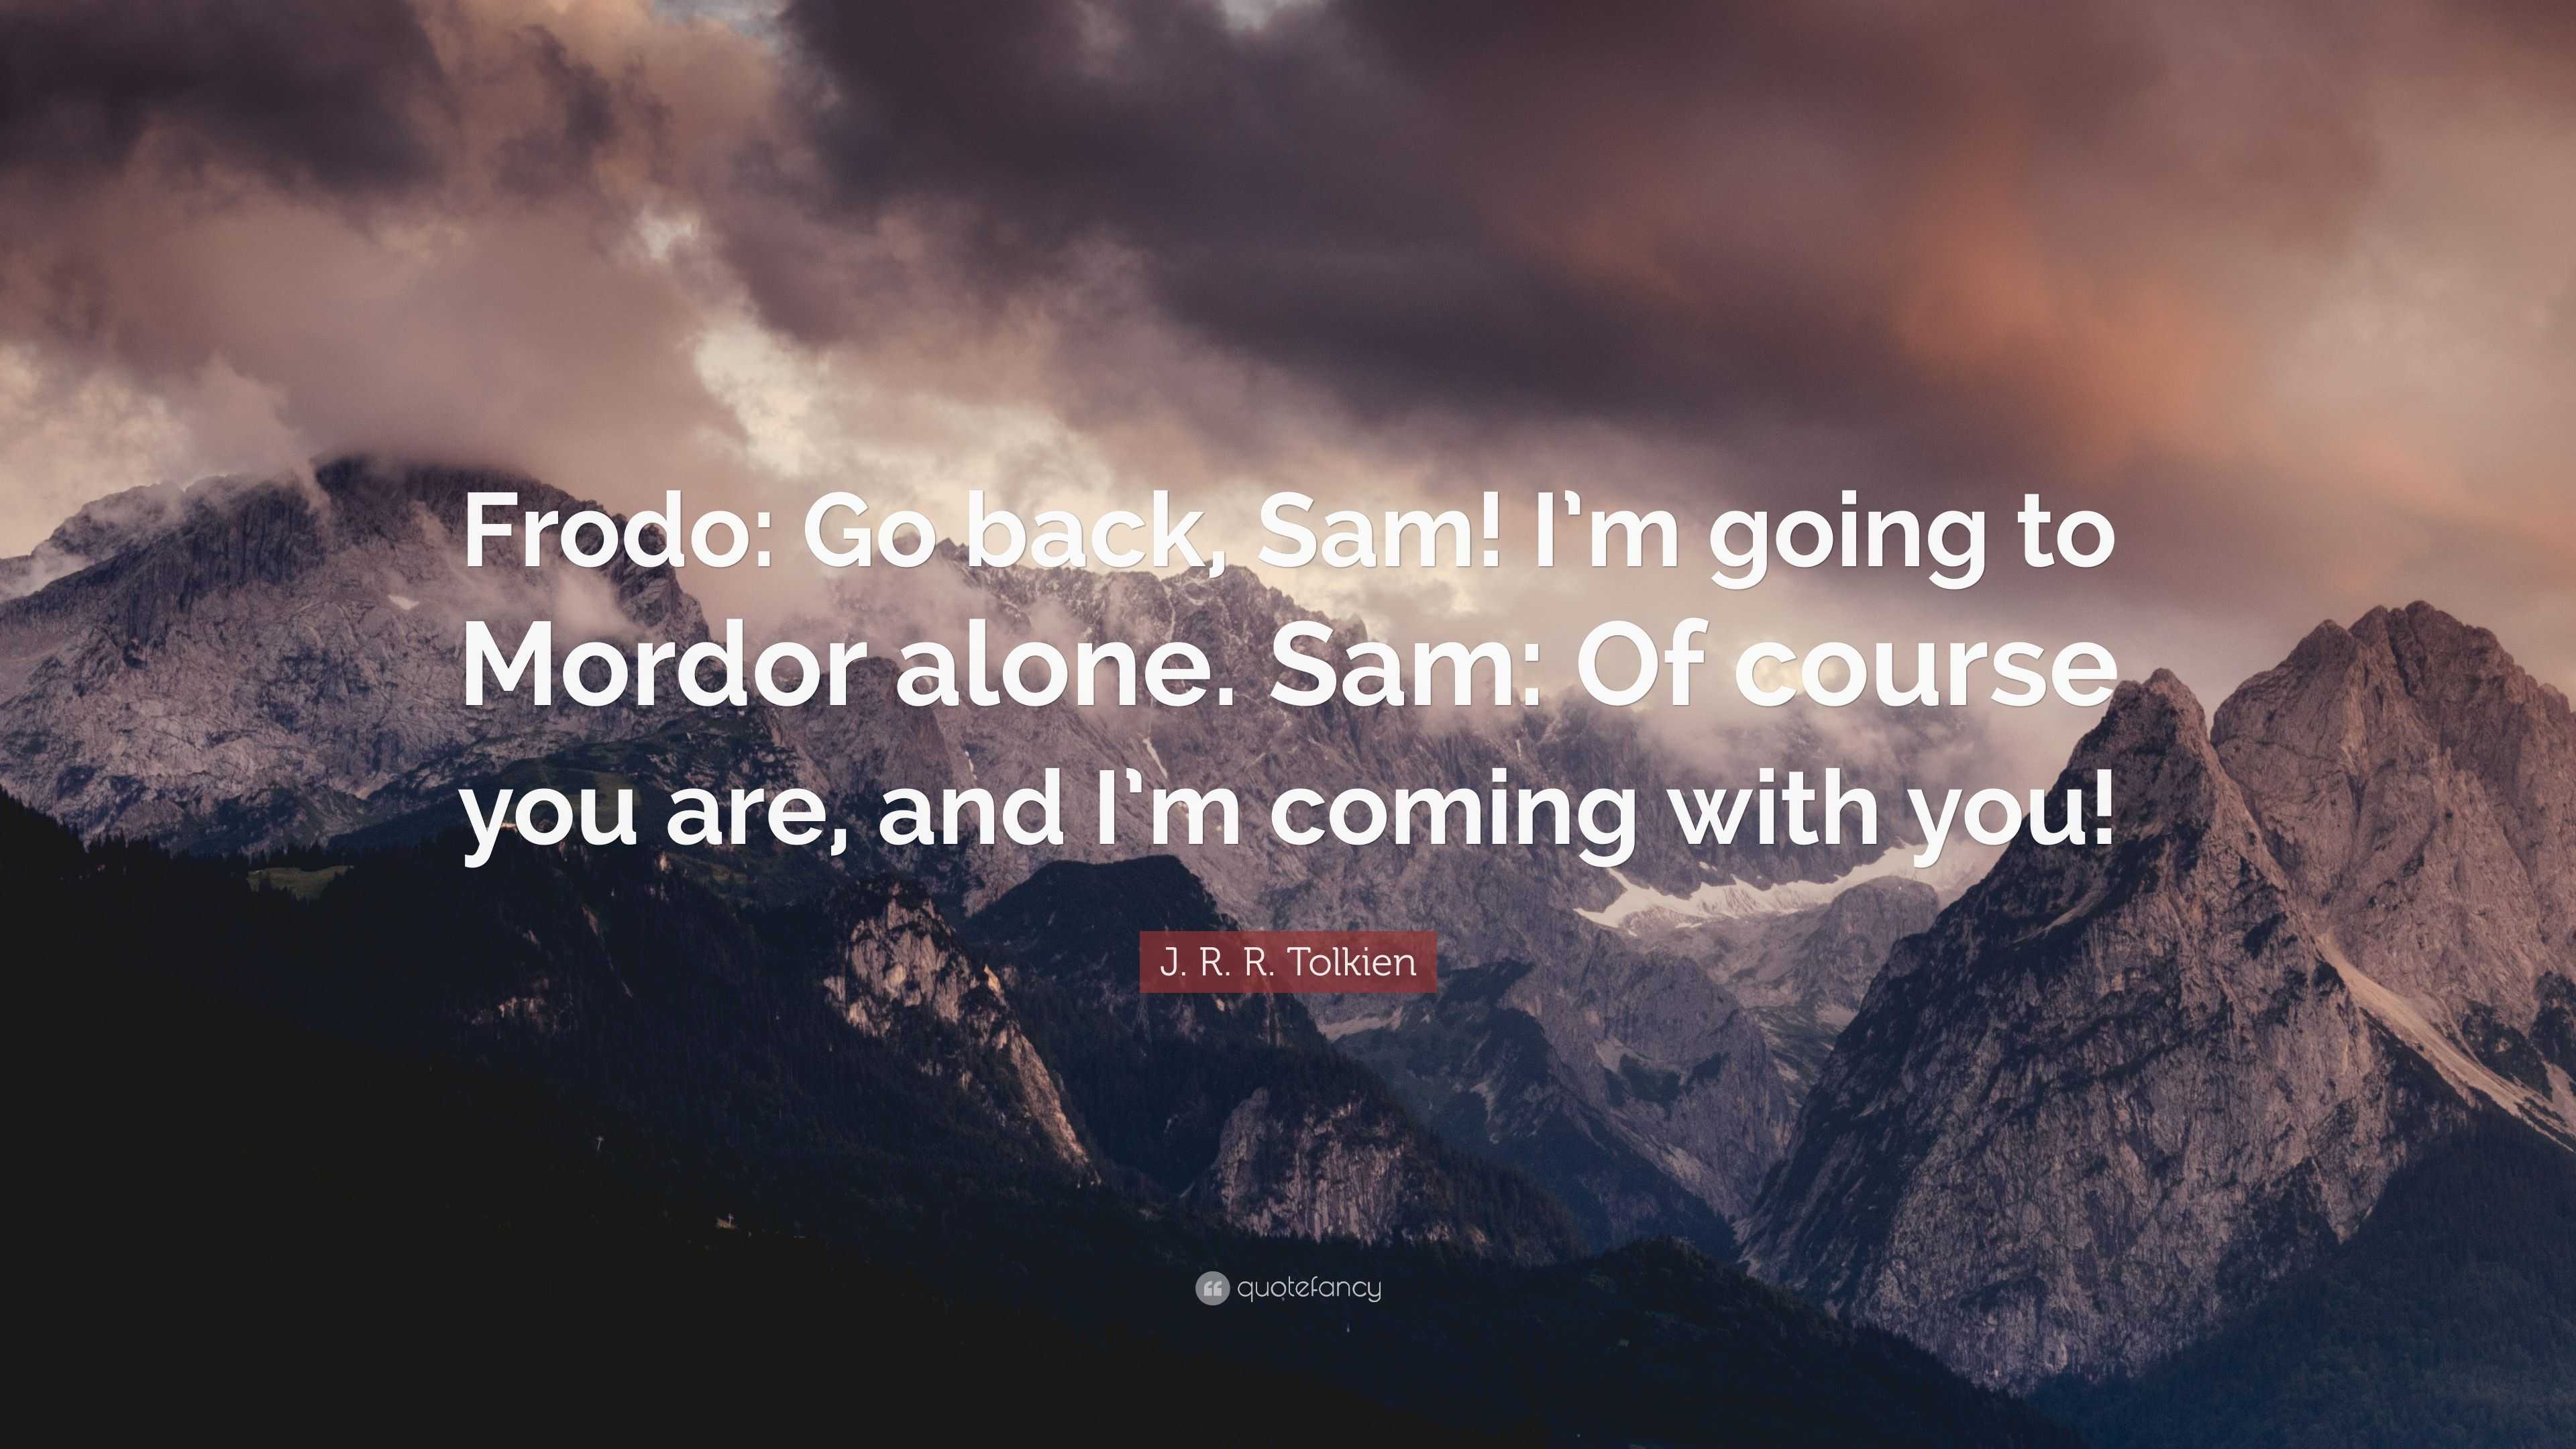 sam carrying frodo quote and page